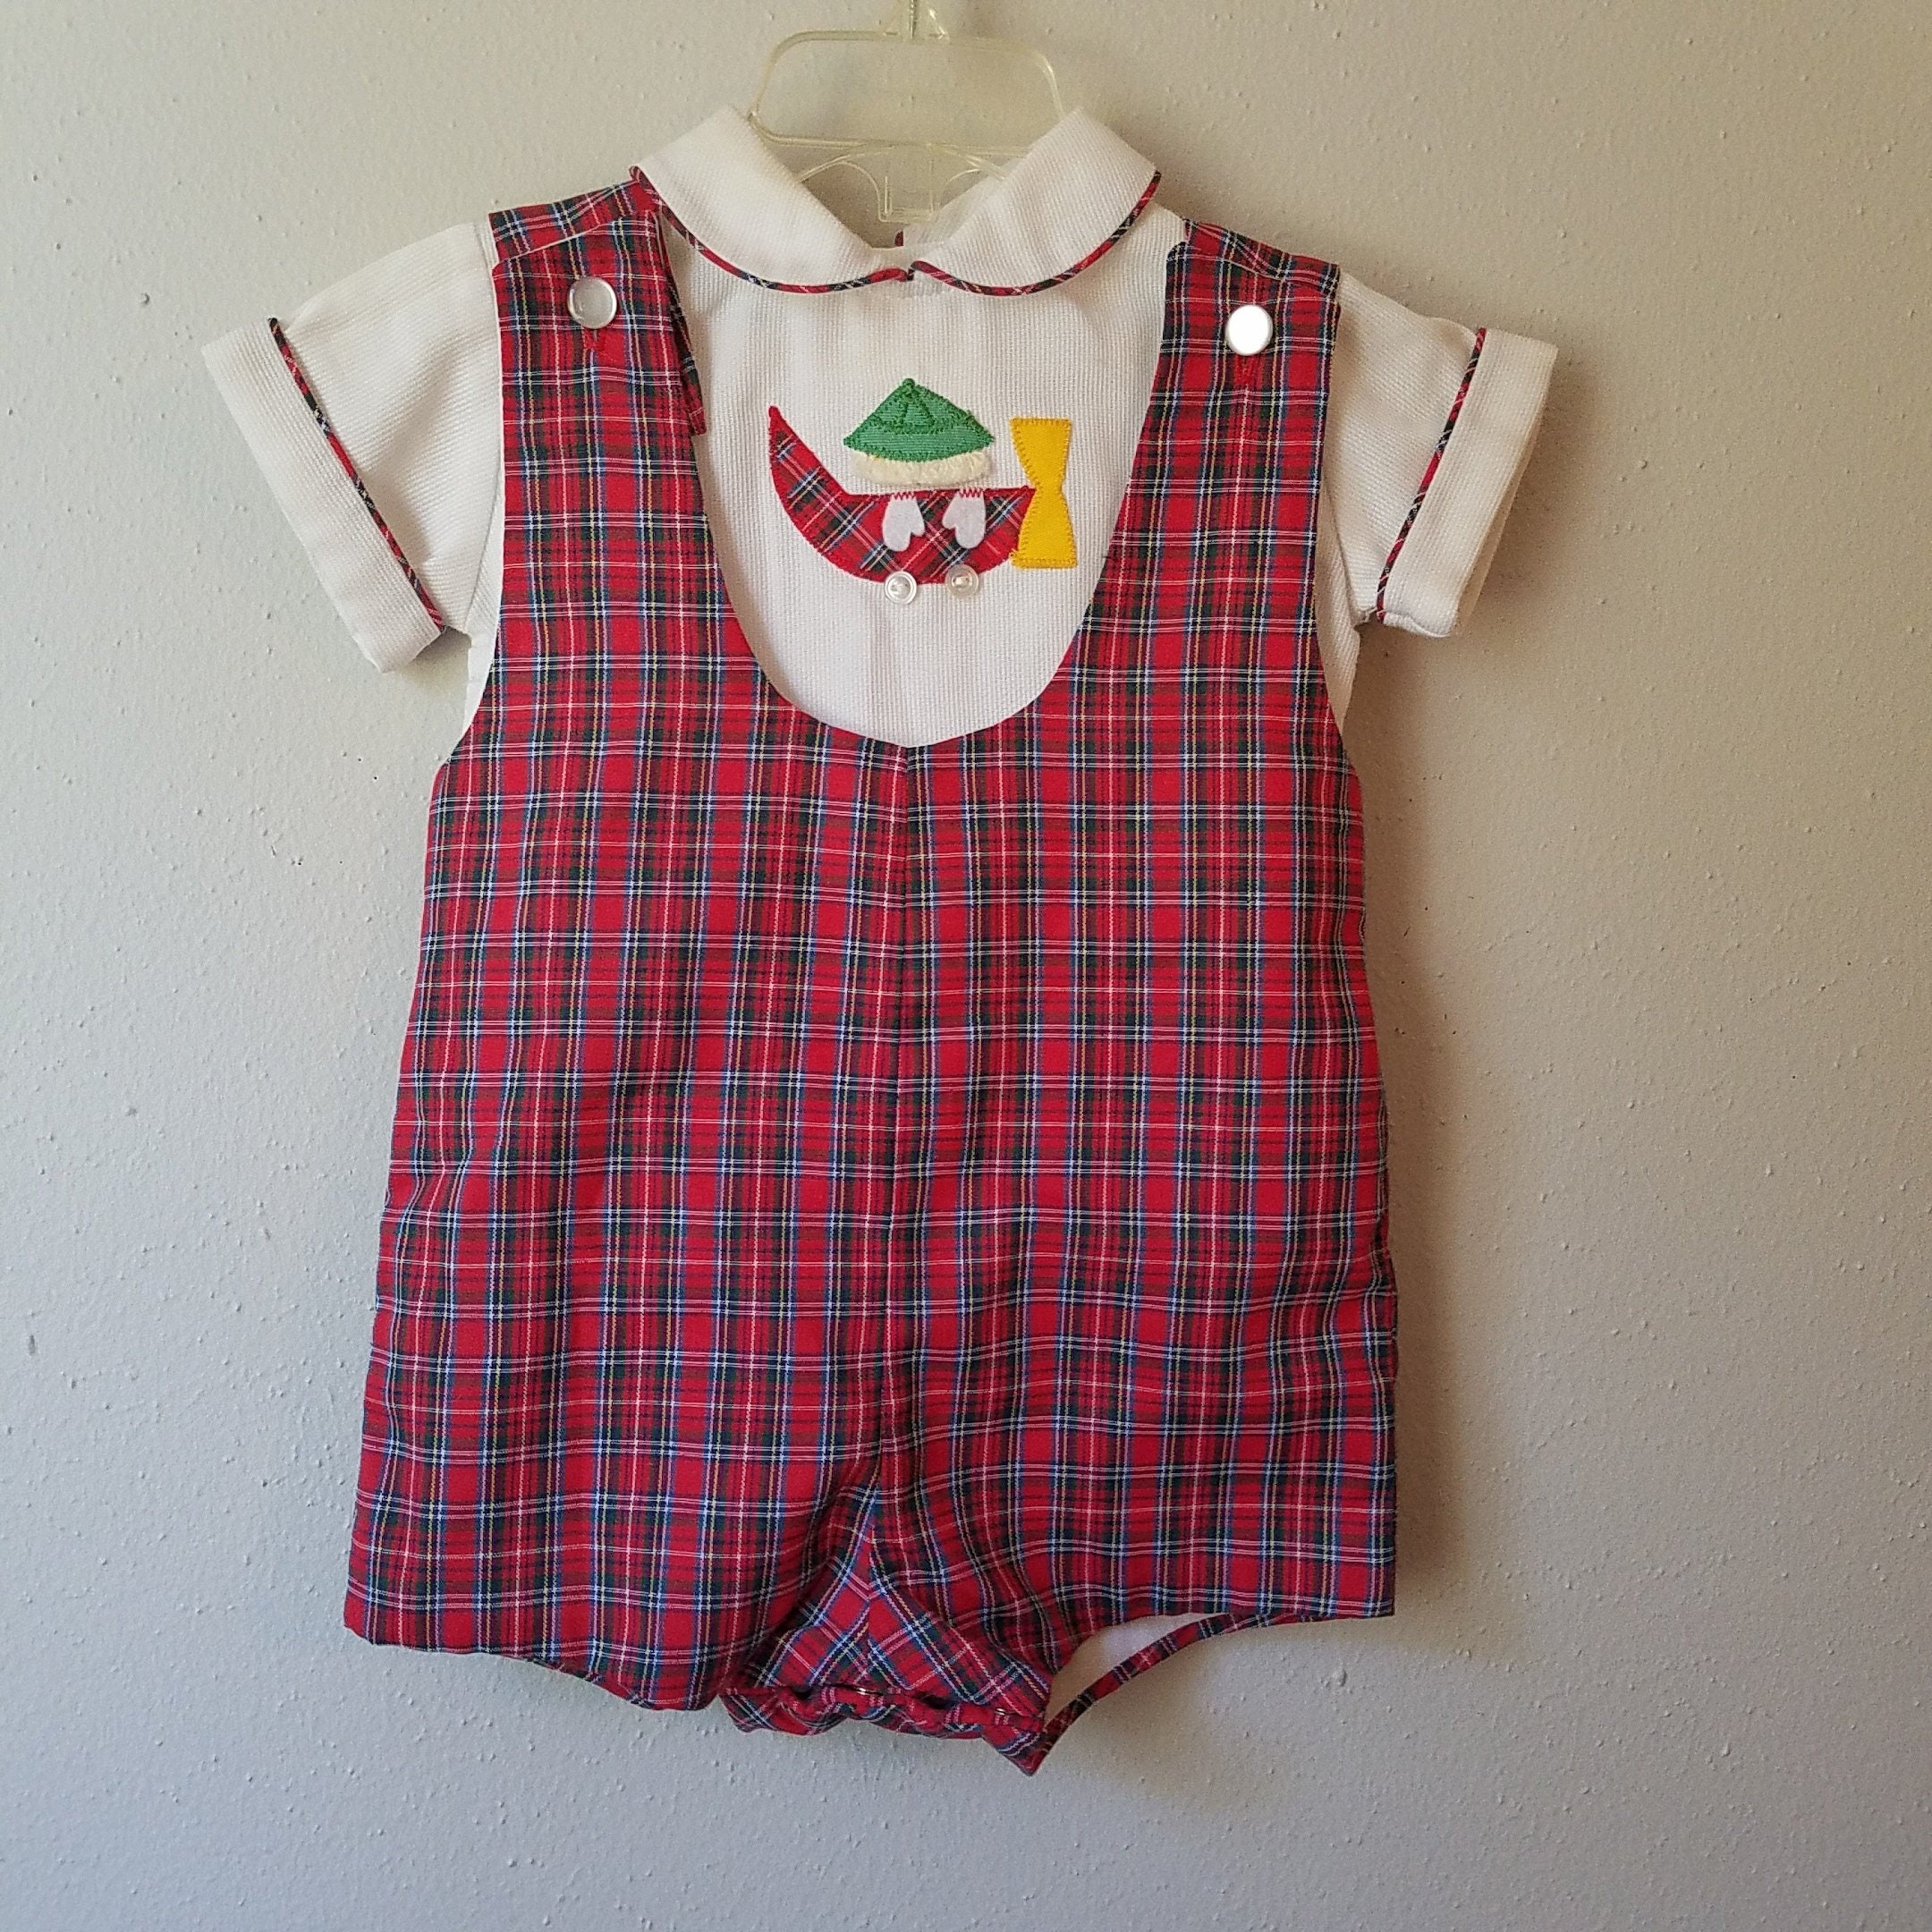 2t Christmas Outfit - Etsy